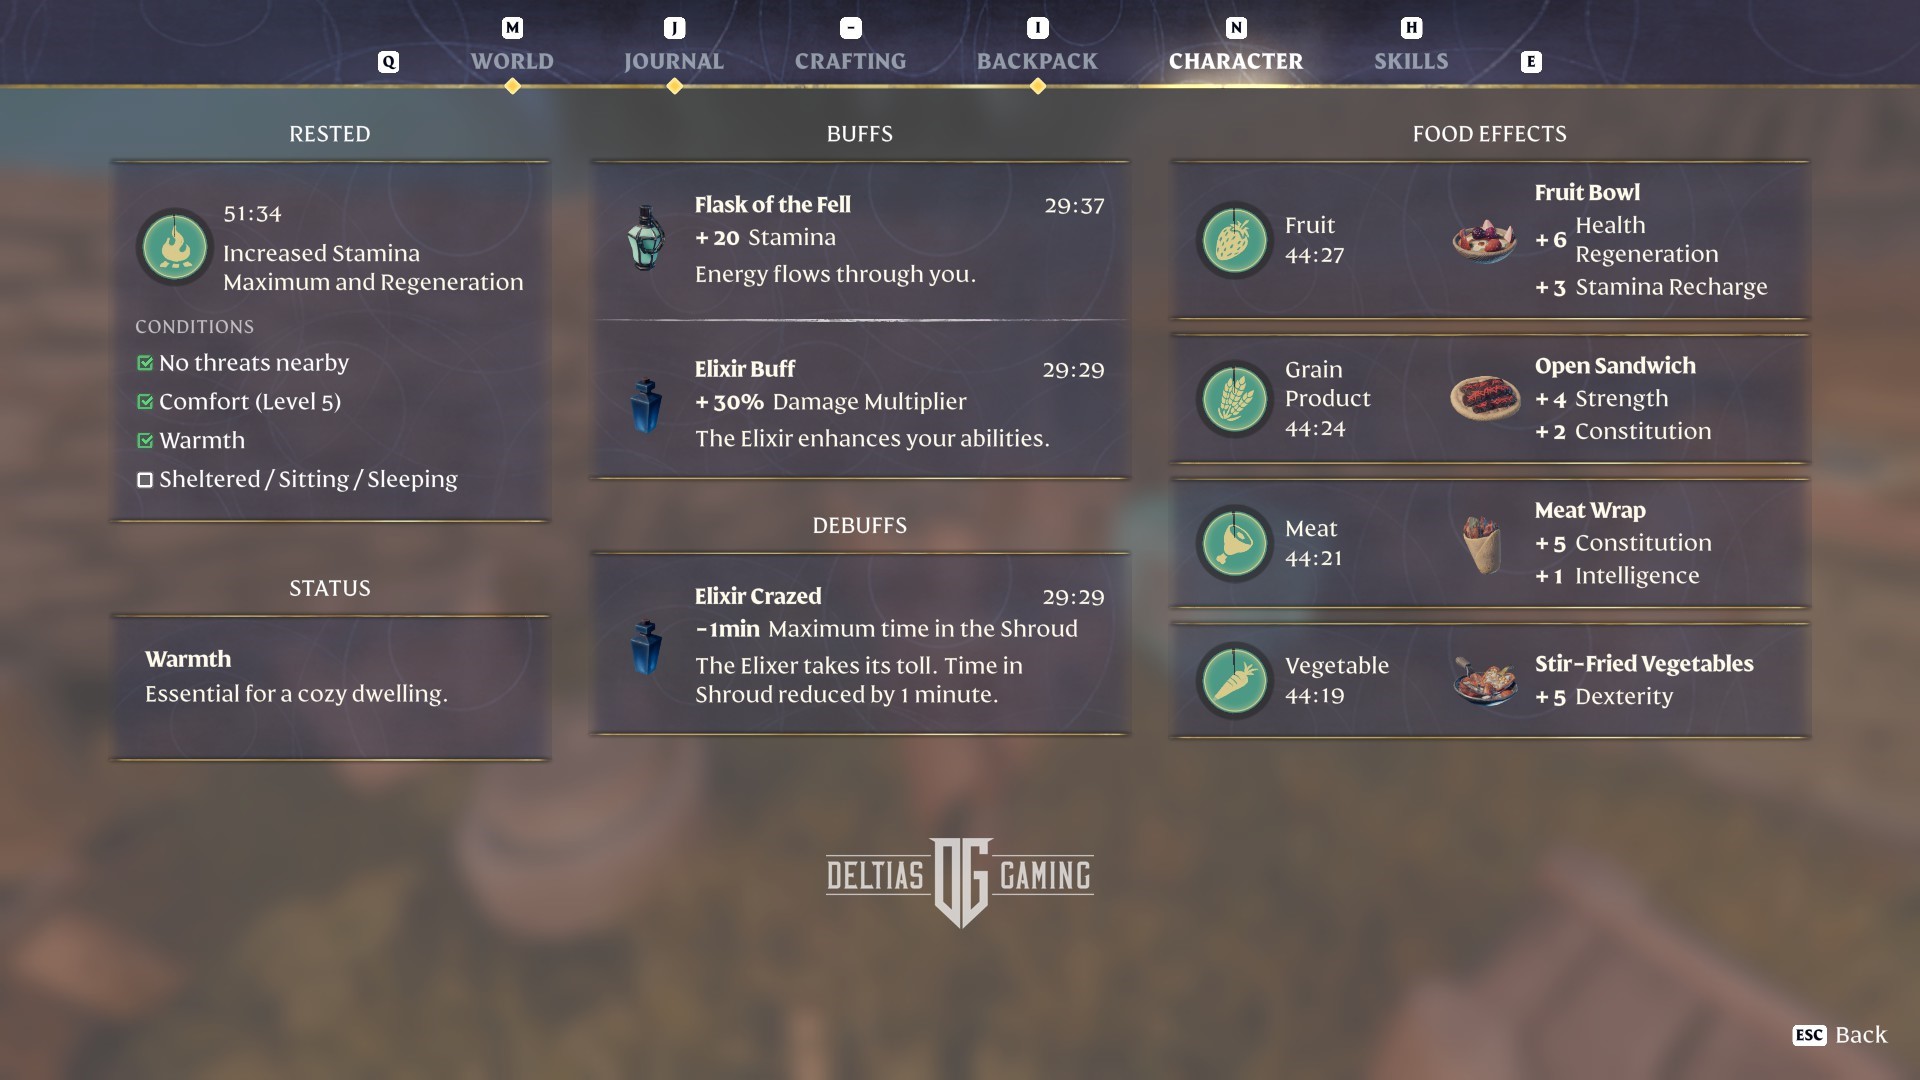 Athlete Consumables and Food in Enshrouded Build